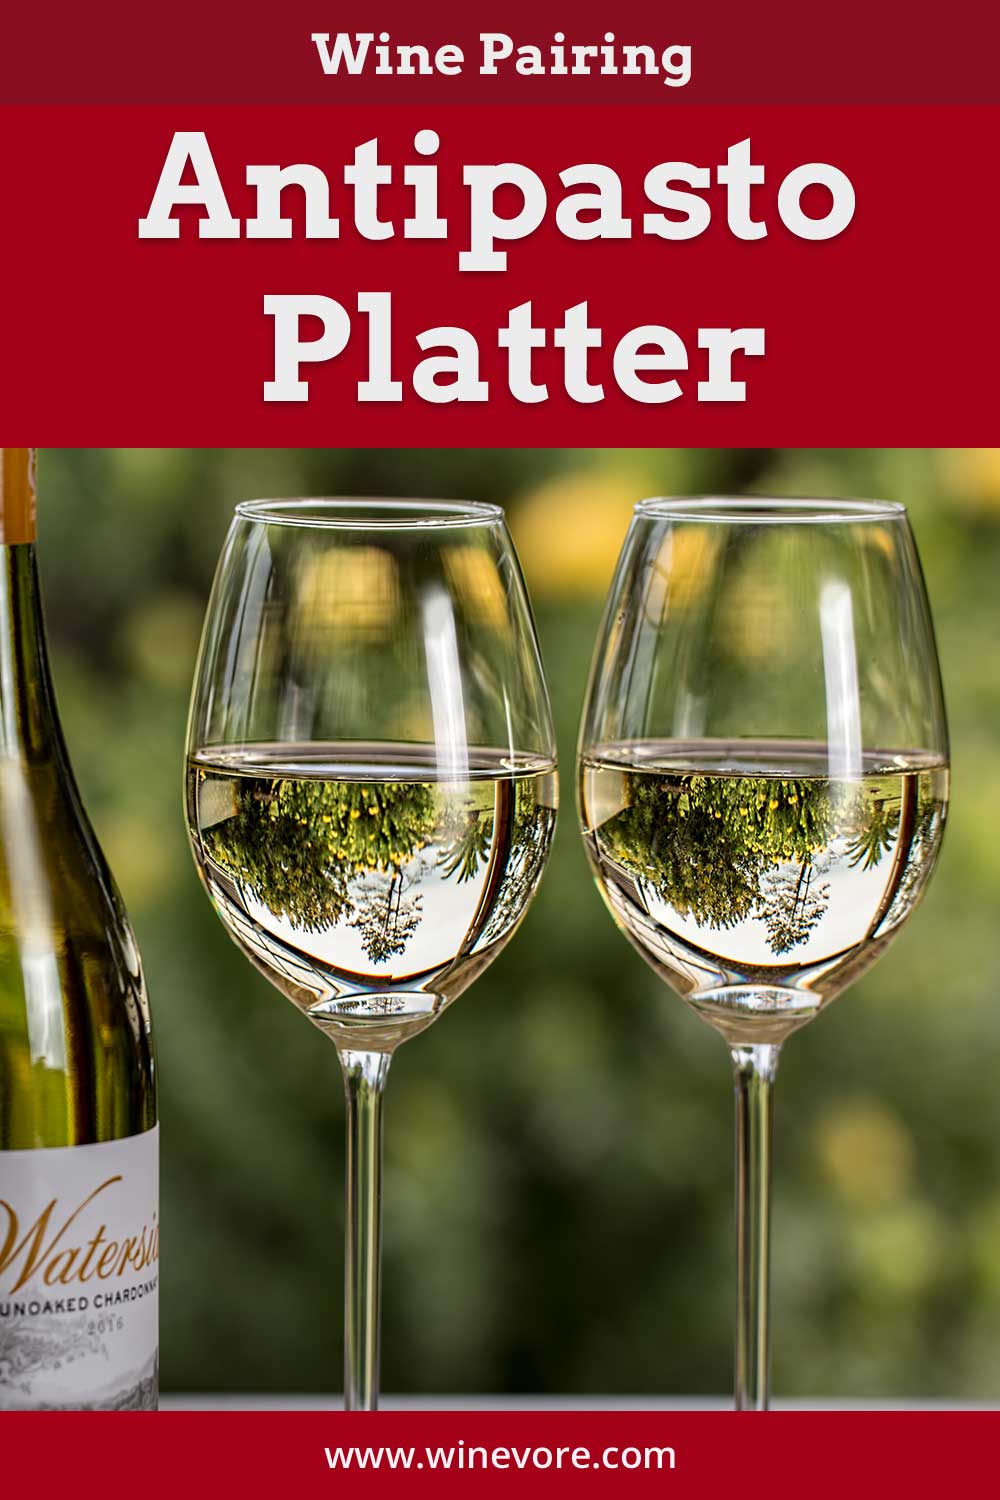 Two wine glasses with white wine in them near a wine bottle - Wine Pairing Antipasto Platter.